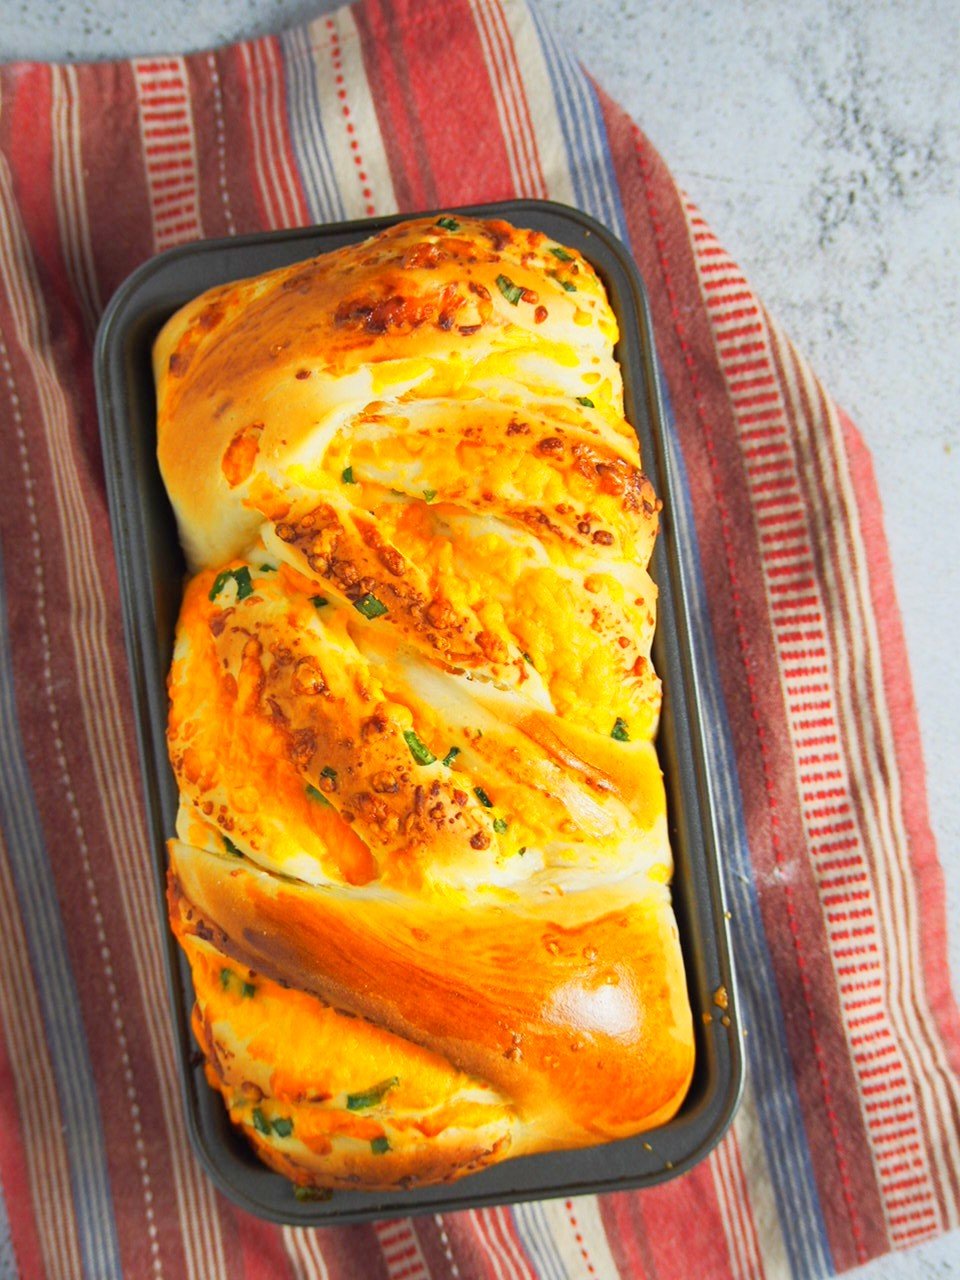 Top angle shot of cheese loaf bread.